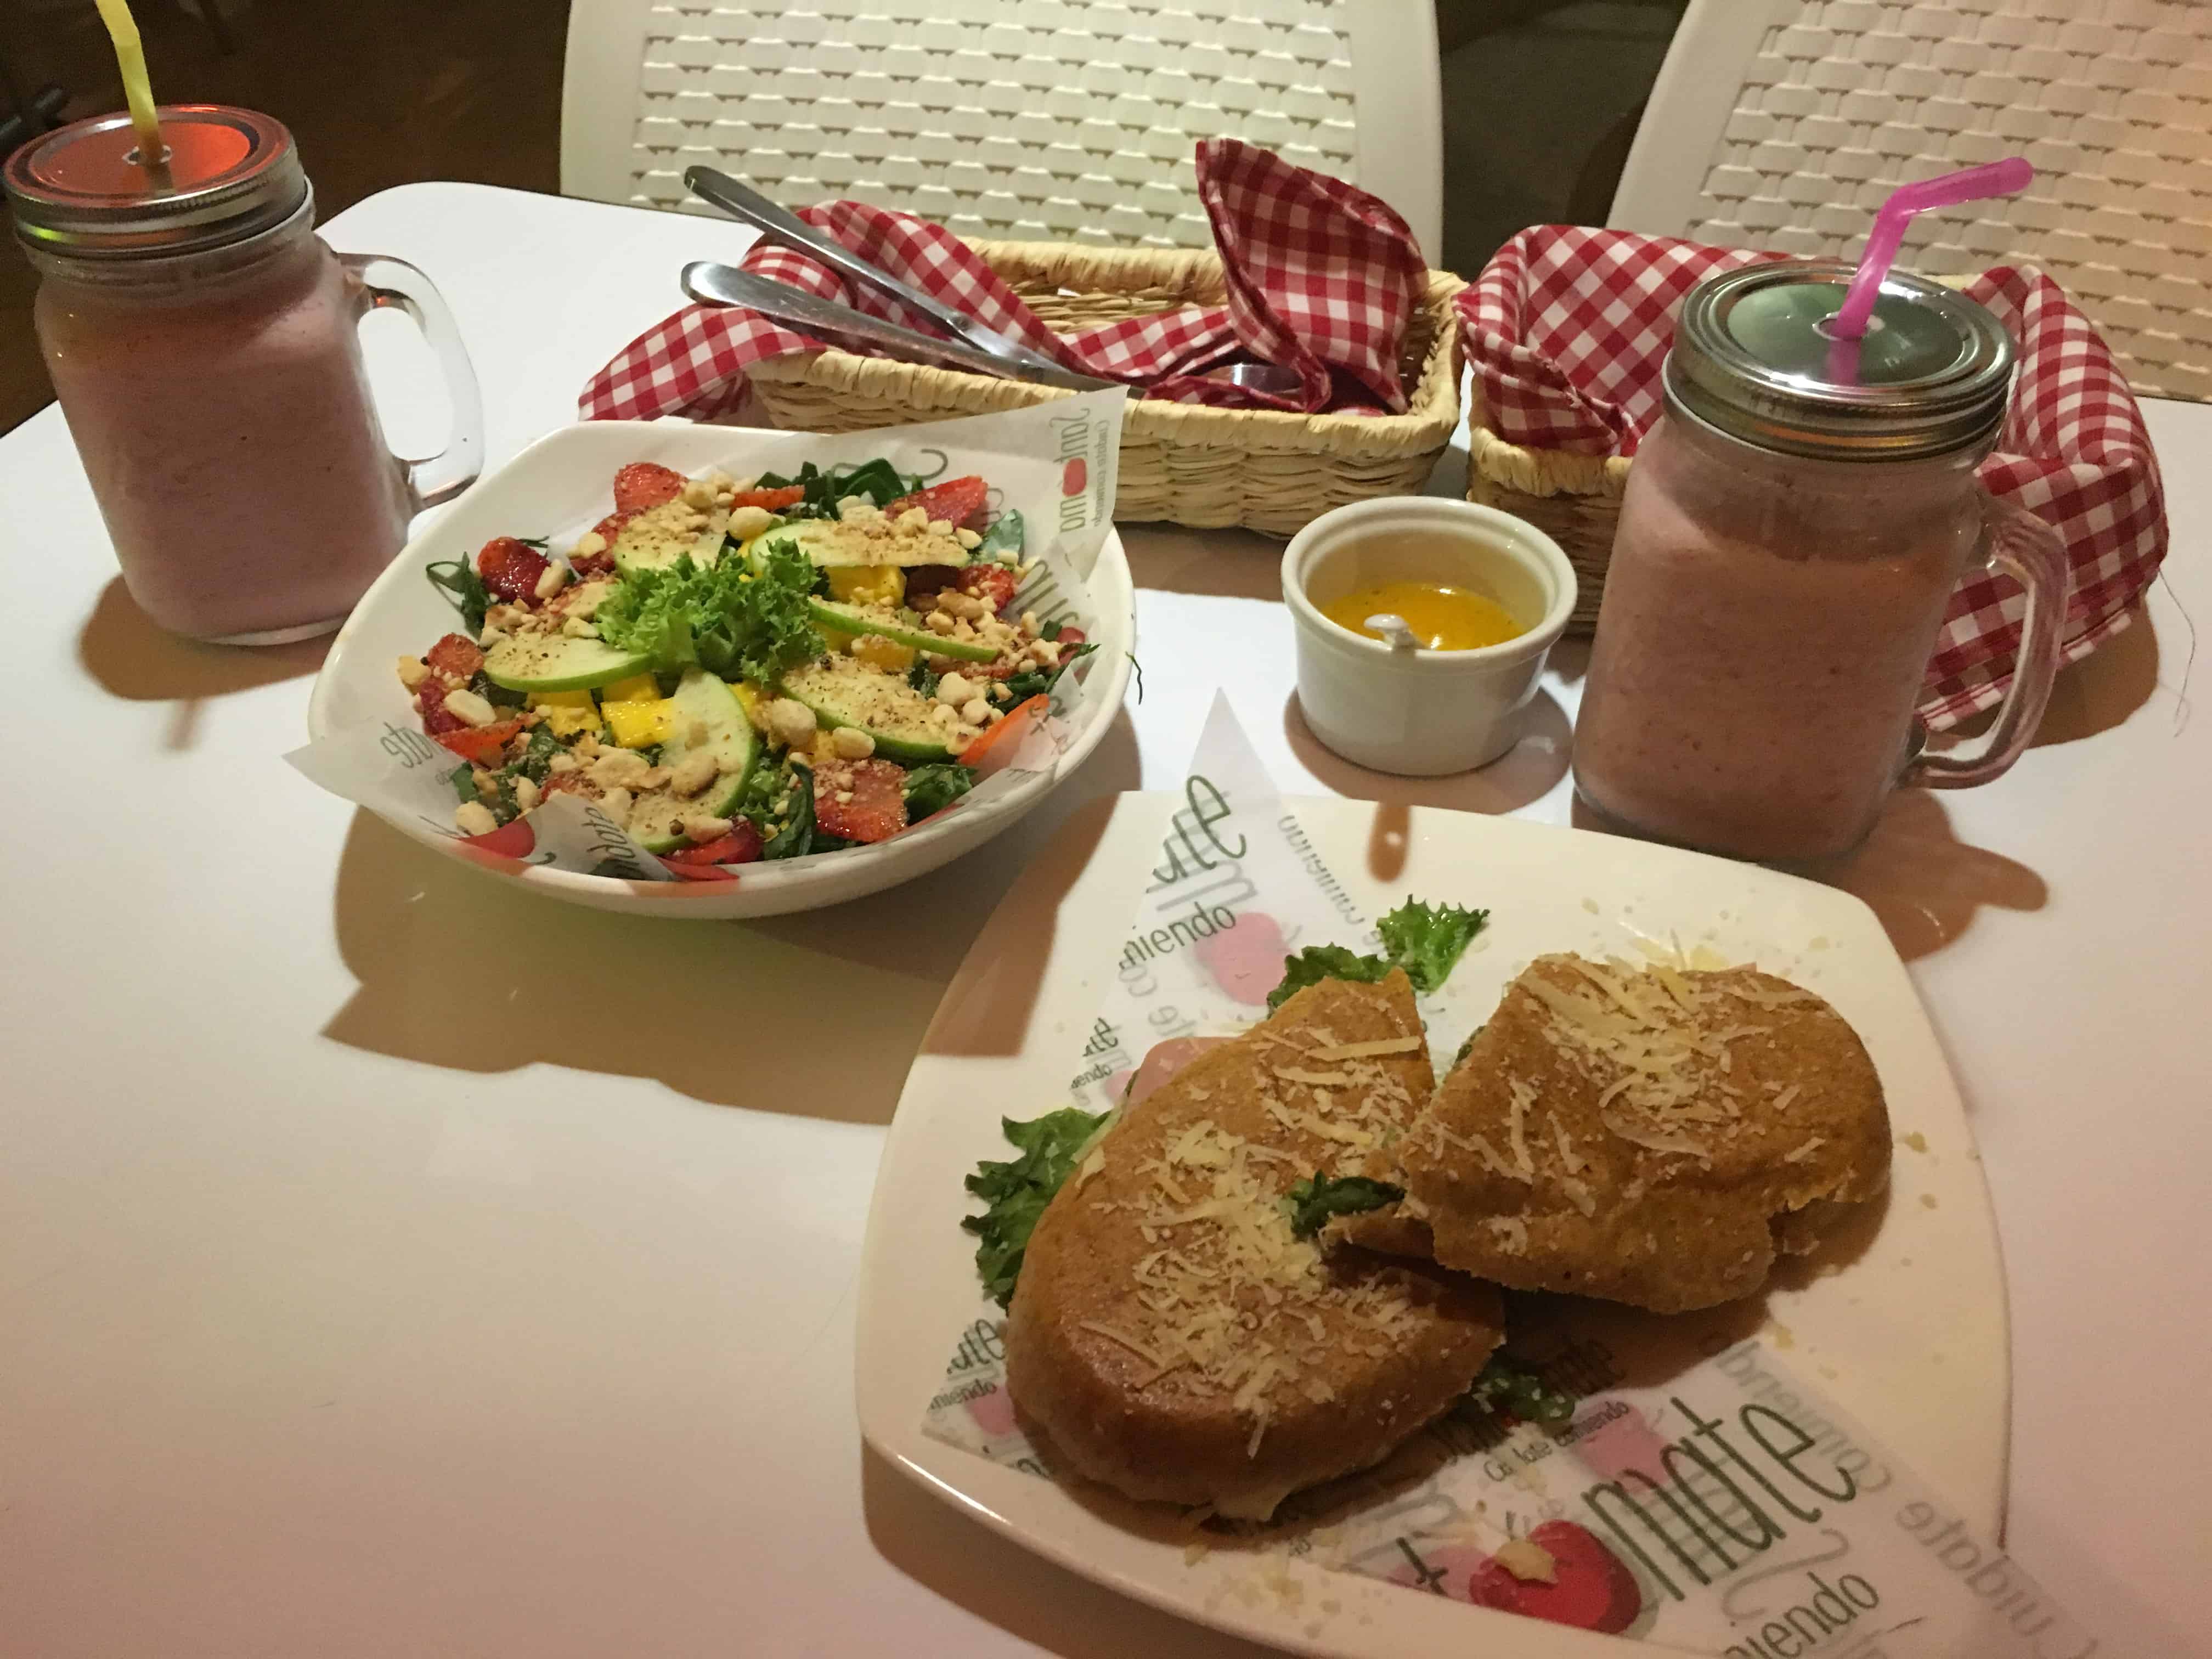 Salad and sandwich at Santomate in Anserma, Caldas, Colombia